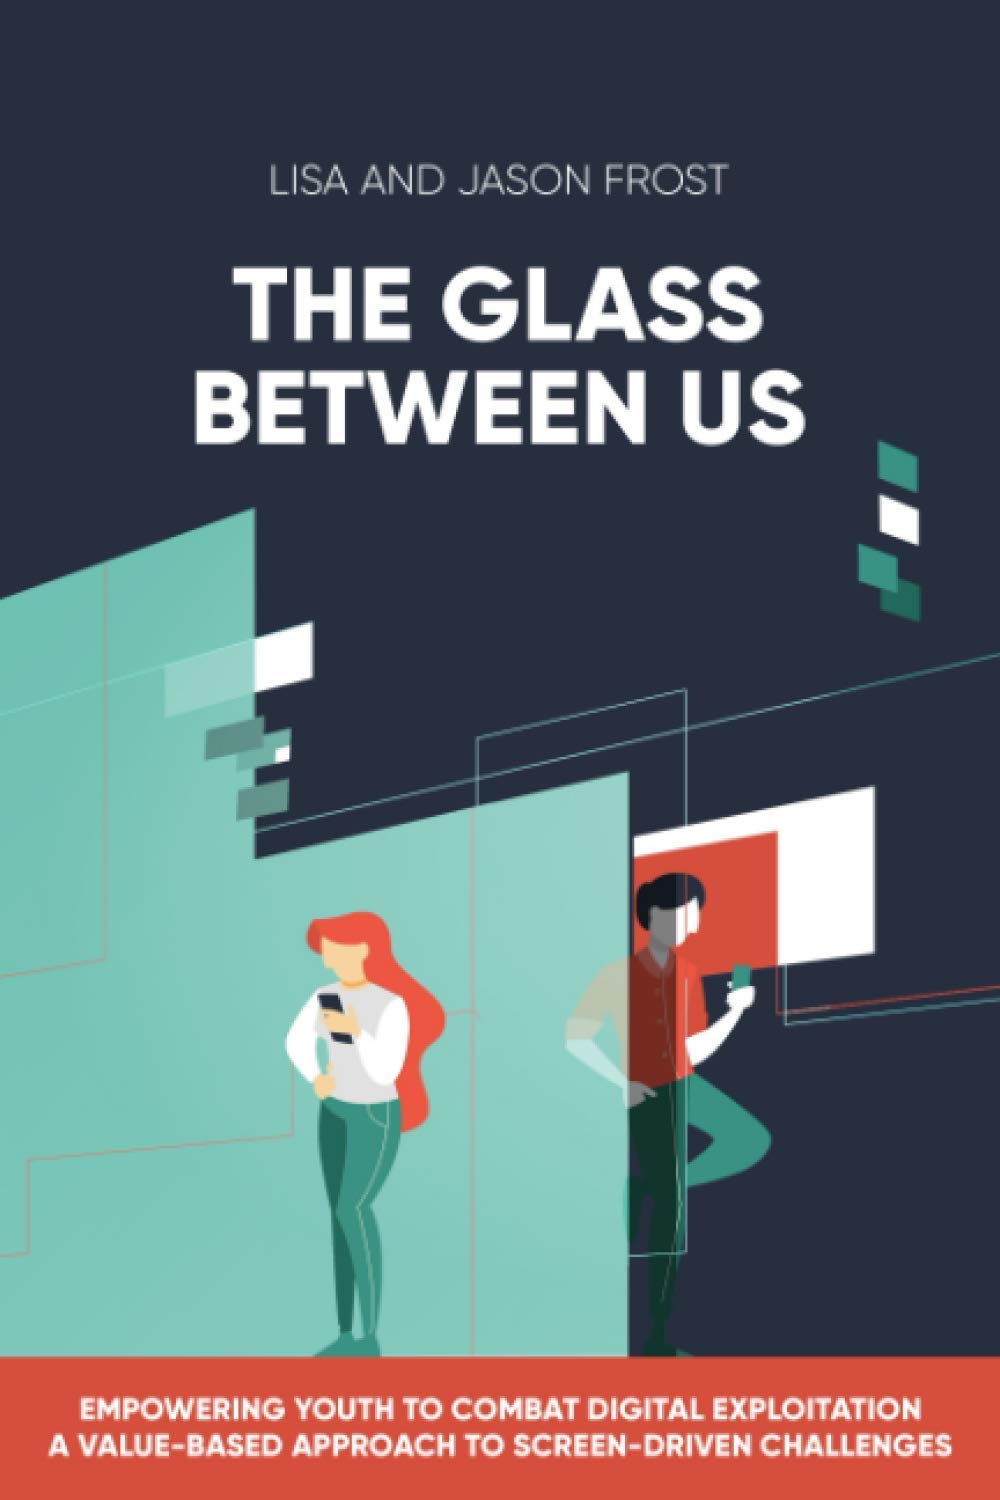 The Glass Between Us by Lisa and Jason Frost